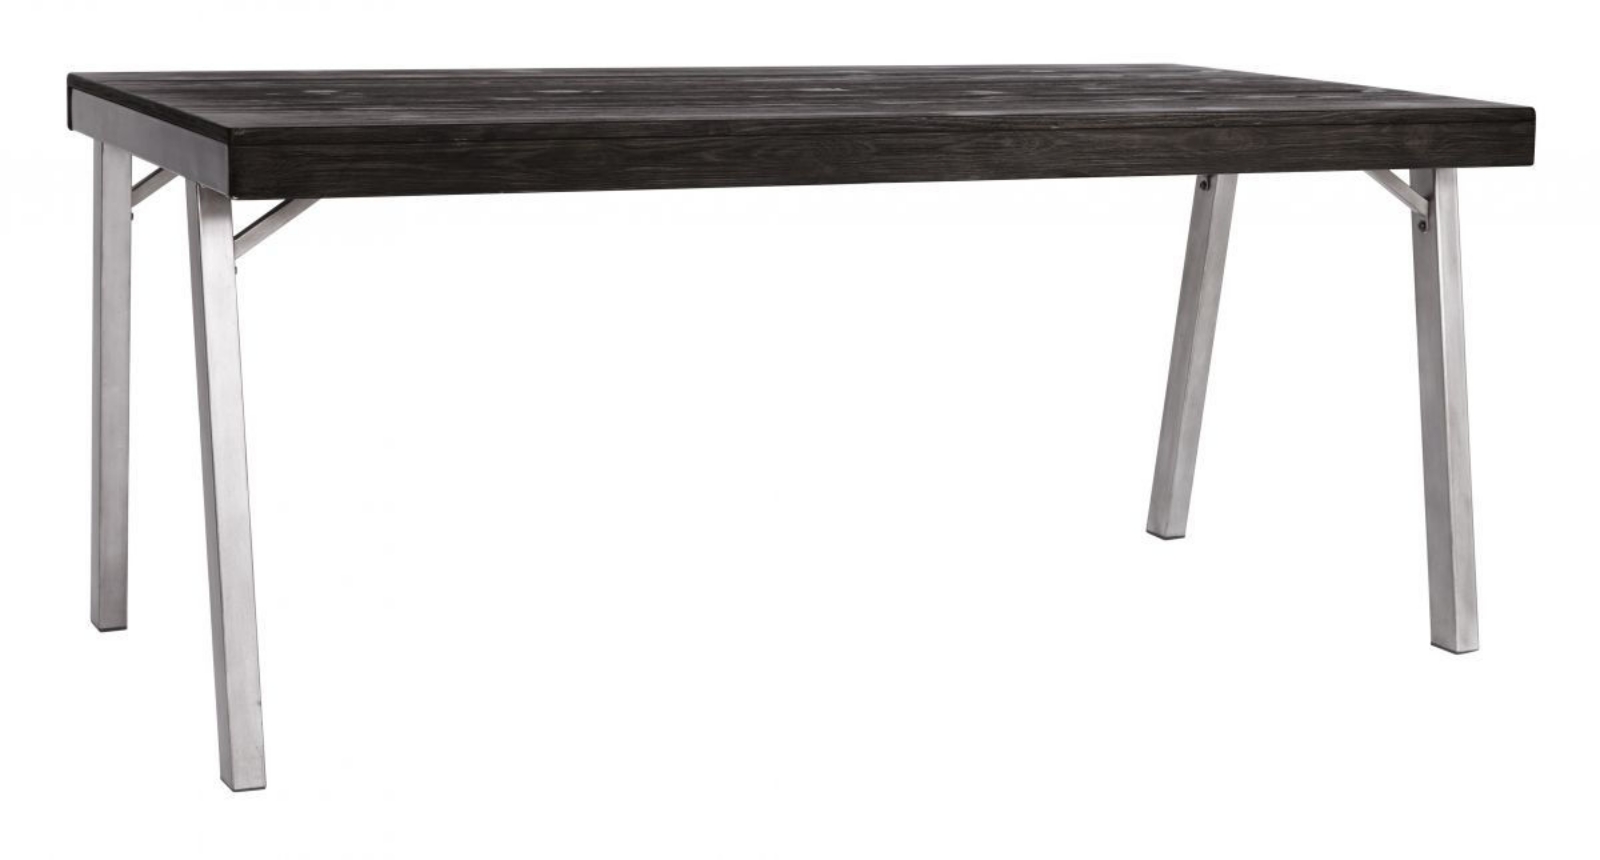 Picture of Raventown Dining Table